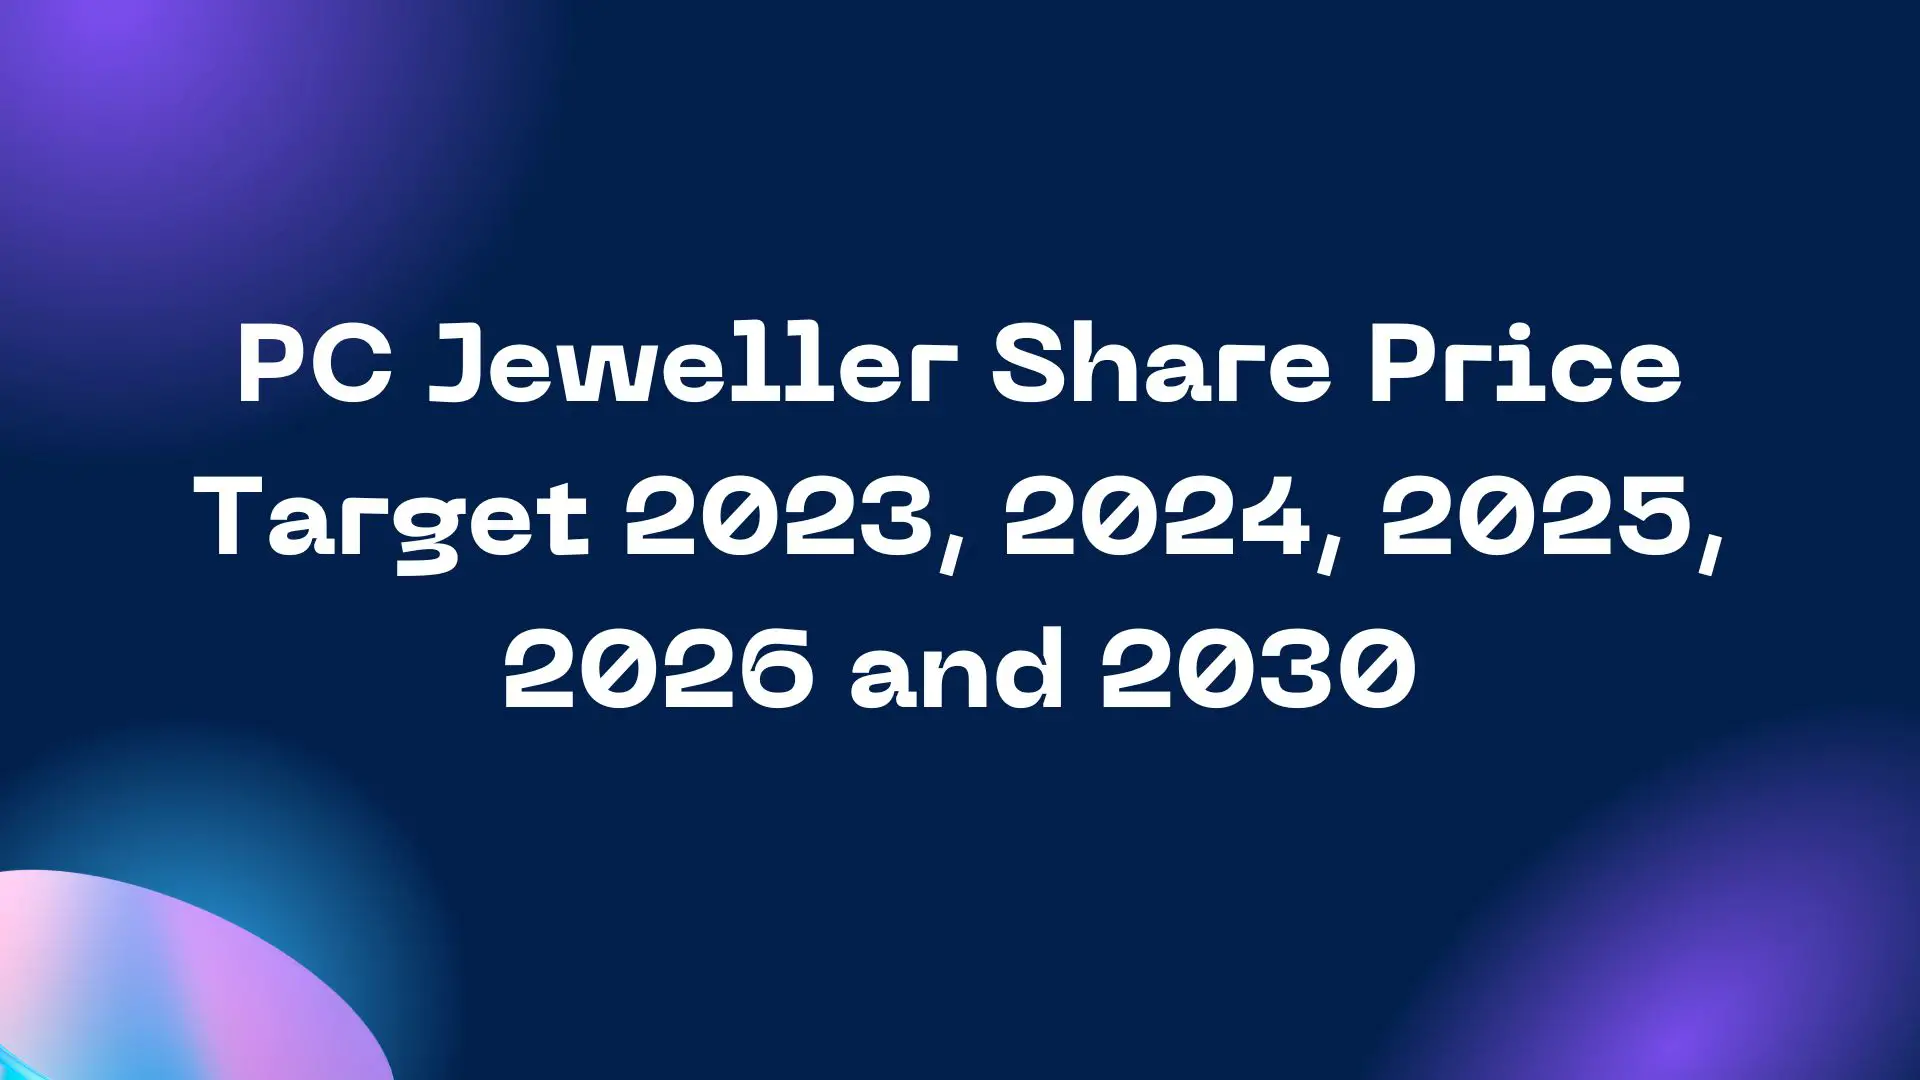 PC Jeweller Share Price Target 2023, 2024, 2025, 2026 and 2030